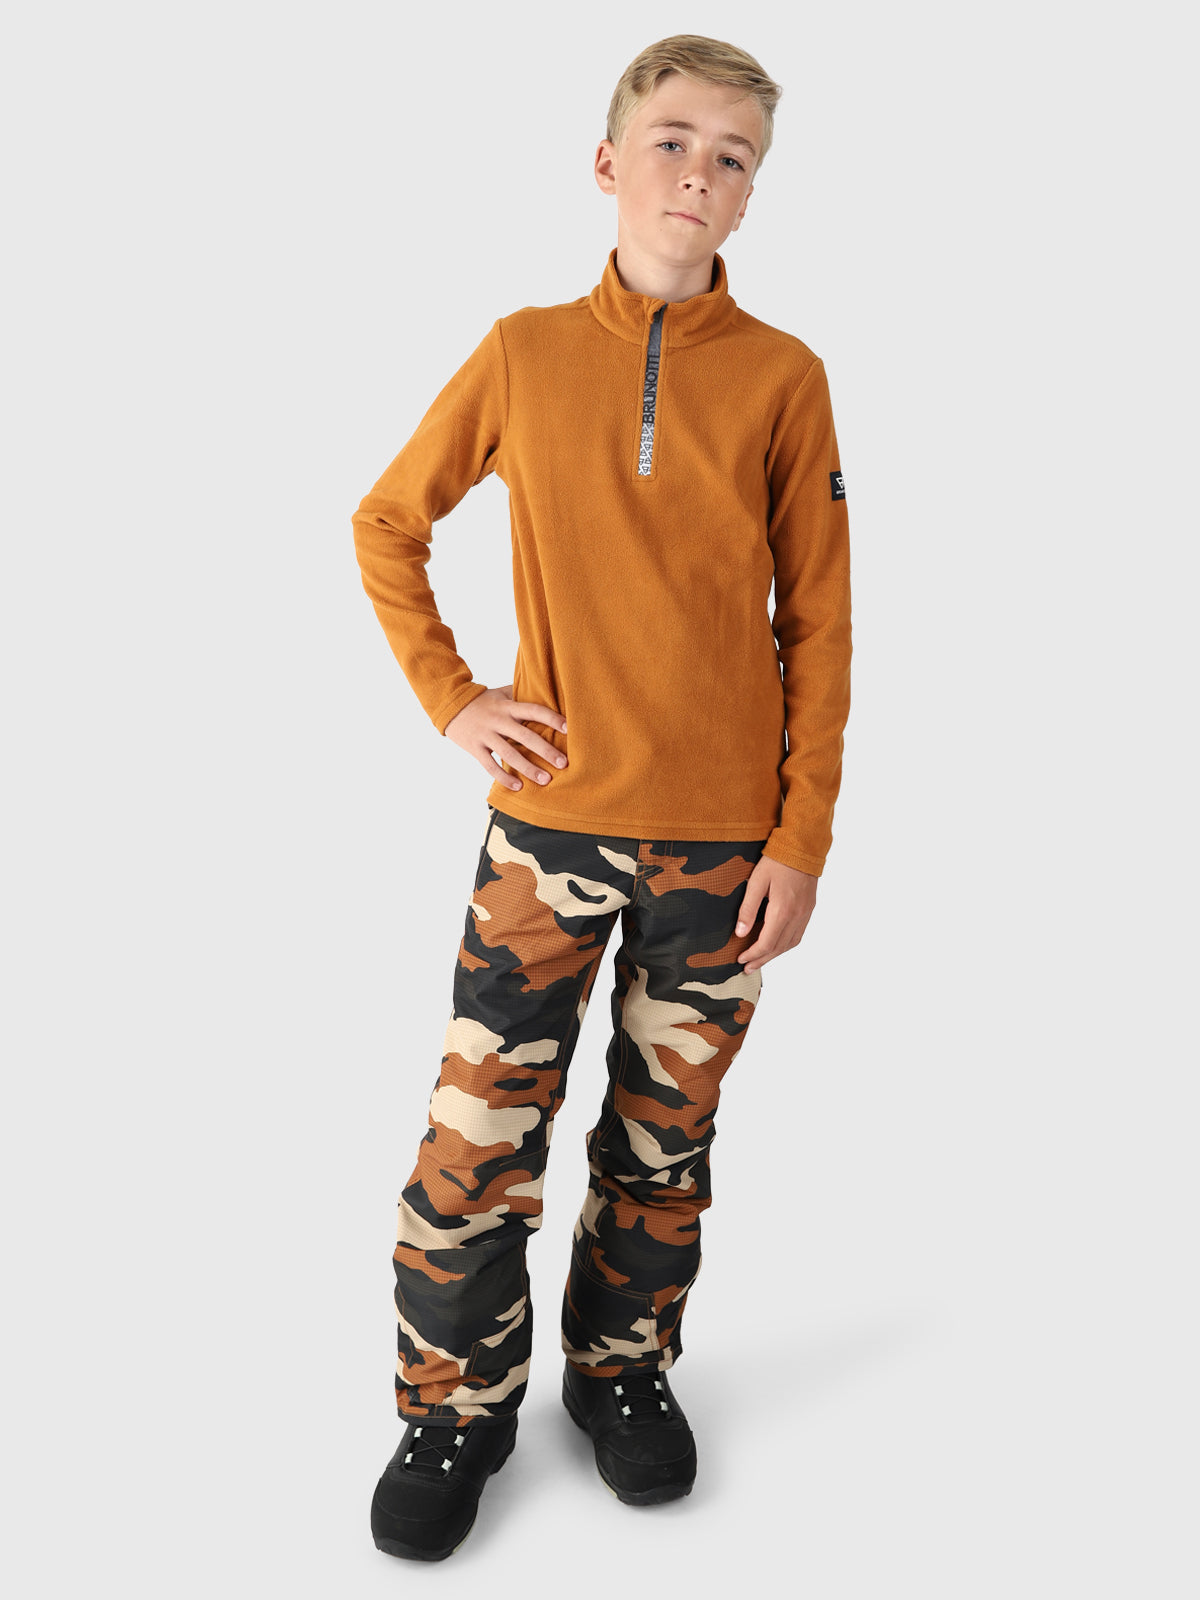 Footraily-AO Footraily Jungen Skihose | Camouflage Braun